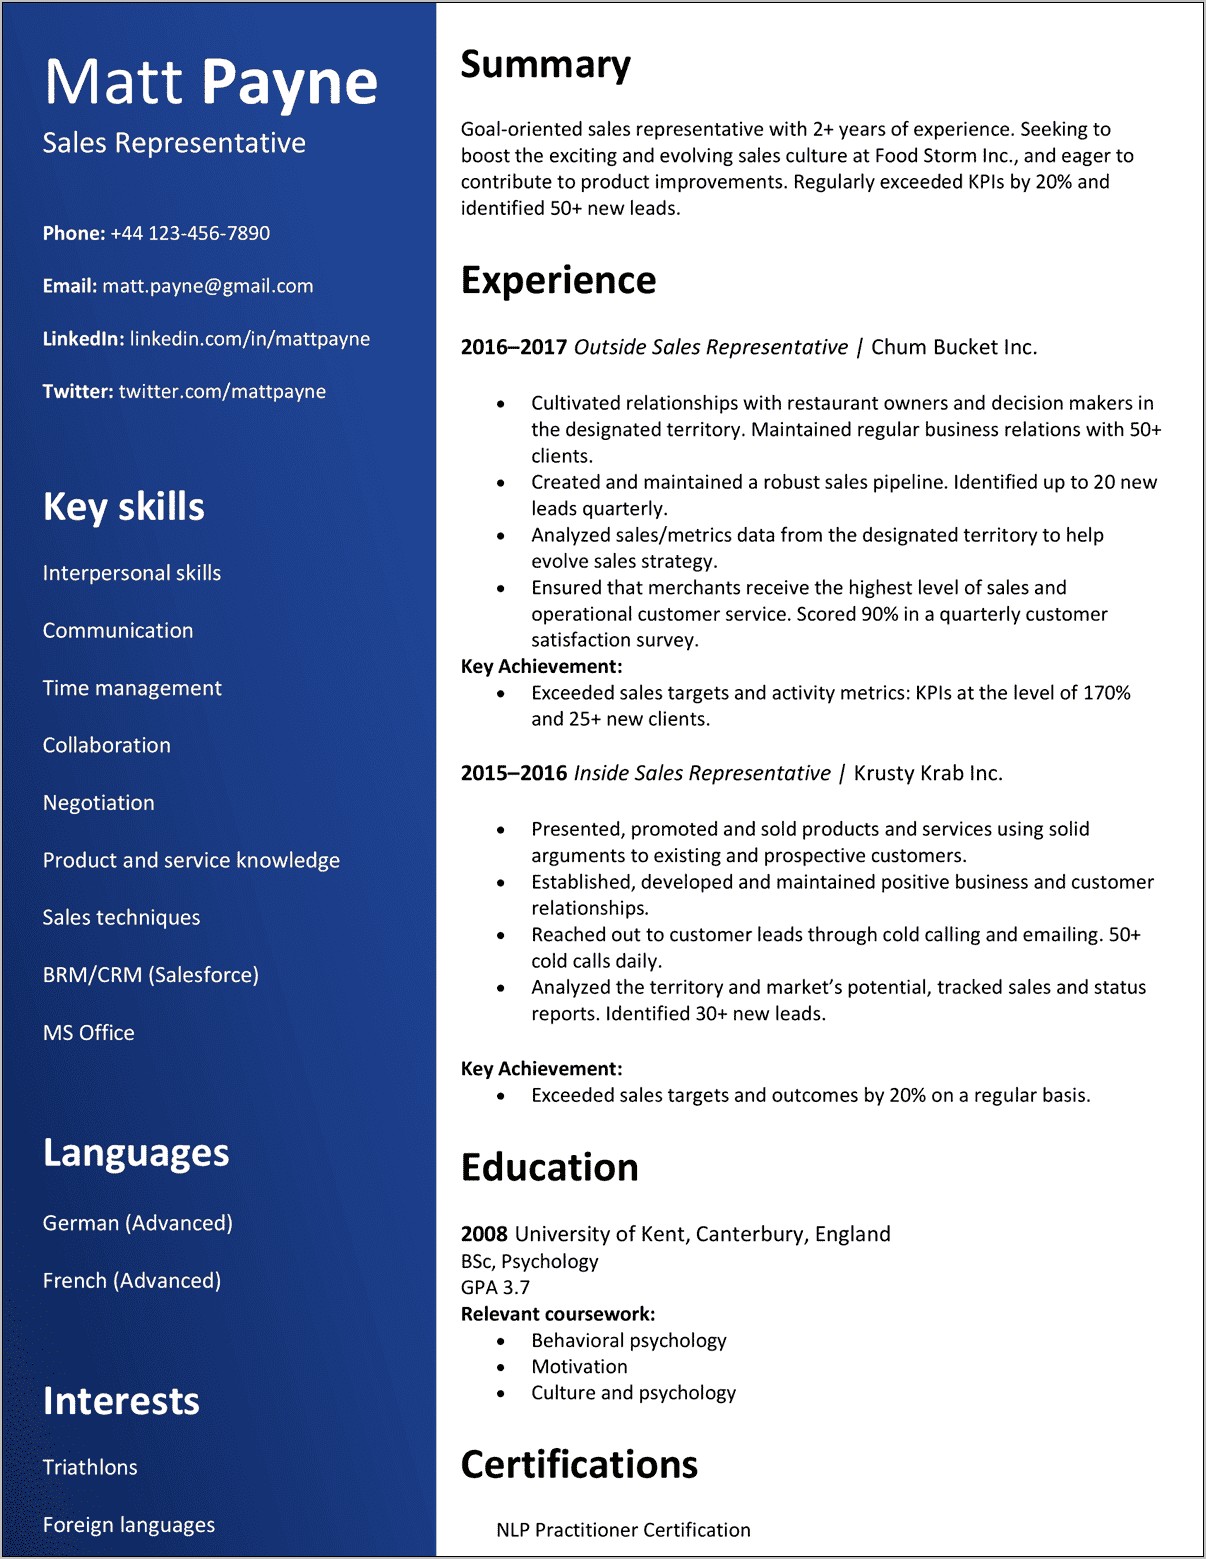 Best Format To Export A Resume To